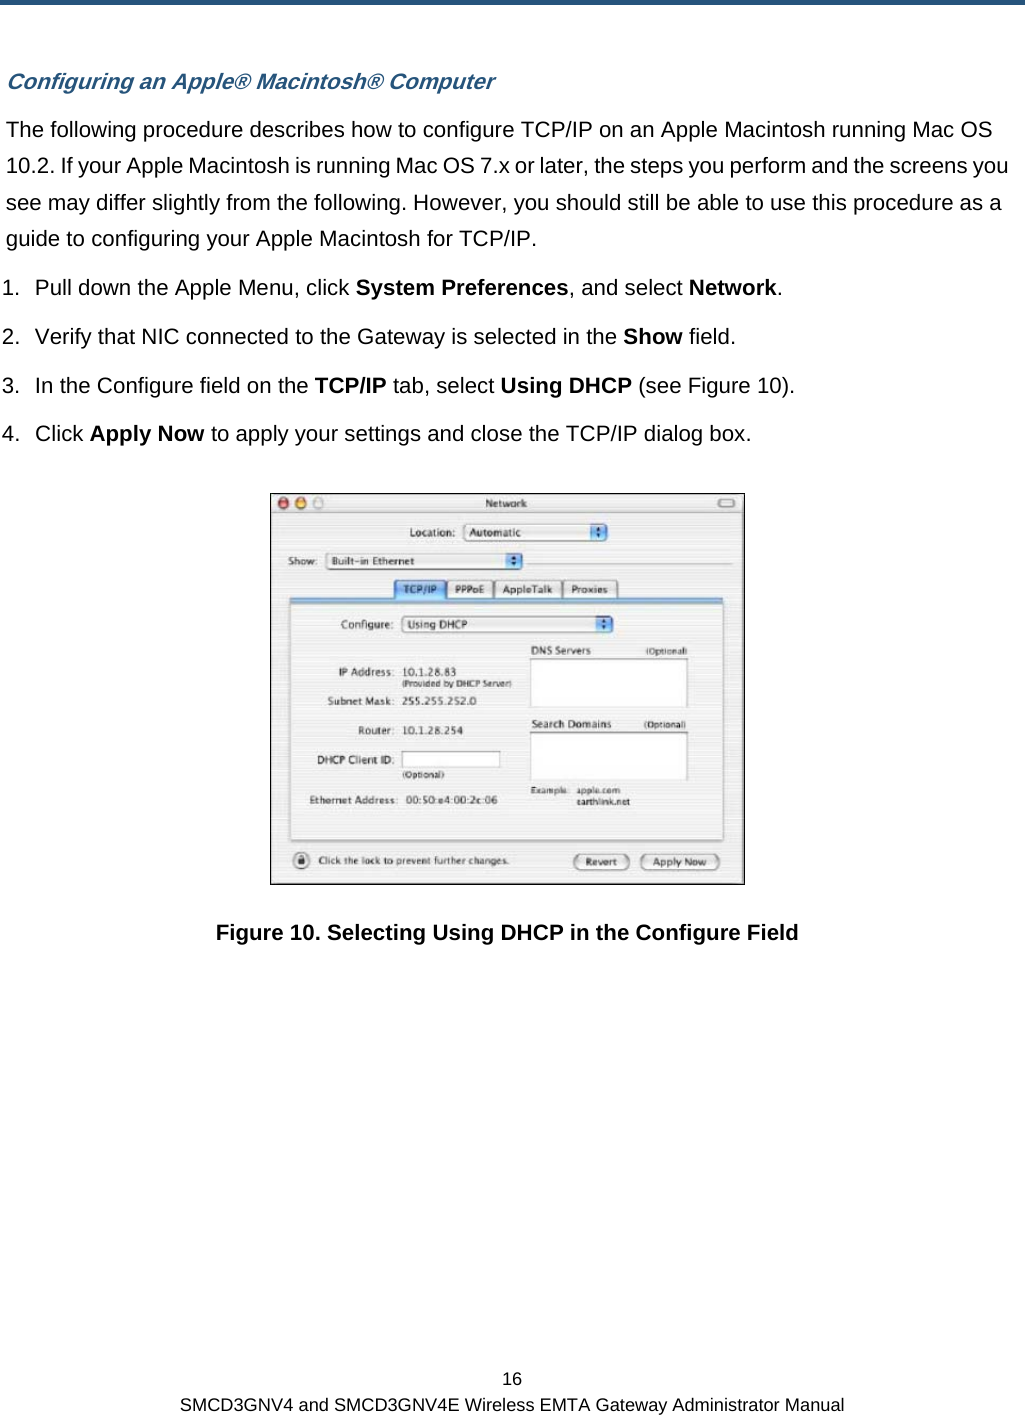  16 SMCD3GNV4 and SMCD3GNV4E Wireless EMTA Gateway Administrator Manual Configuring an Apple® Macintosh® Computer The following procedure describes how to configure TCP/IP on an Apple Macintosh running Mac OS 10.2. If your Apple Macintosh is running Mac OS 7.x or later, the steps you perform and the screens you see may differ slightly from the following. However, you should still be able to use this procedure as a guide to configuring your Apple Macintosh for TCP/IP. 1.  Pull down the Apple Menu, click System Preferences, and select Network. 2.  Verify that NIC connected to the Gateway is selected in the Show field. 3.  In the Configure field on the TCP/IP tab, select Using DHCP (see Figure 10). 4. Click Apply Now to apply your settings and close the TCP/IP dialog box.  Figure 10. Selecting Using DHCP in the Configure Field  